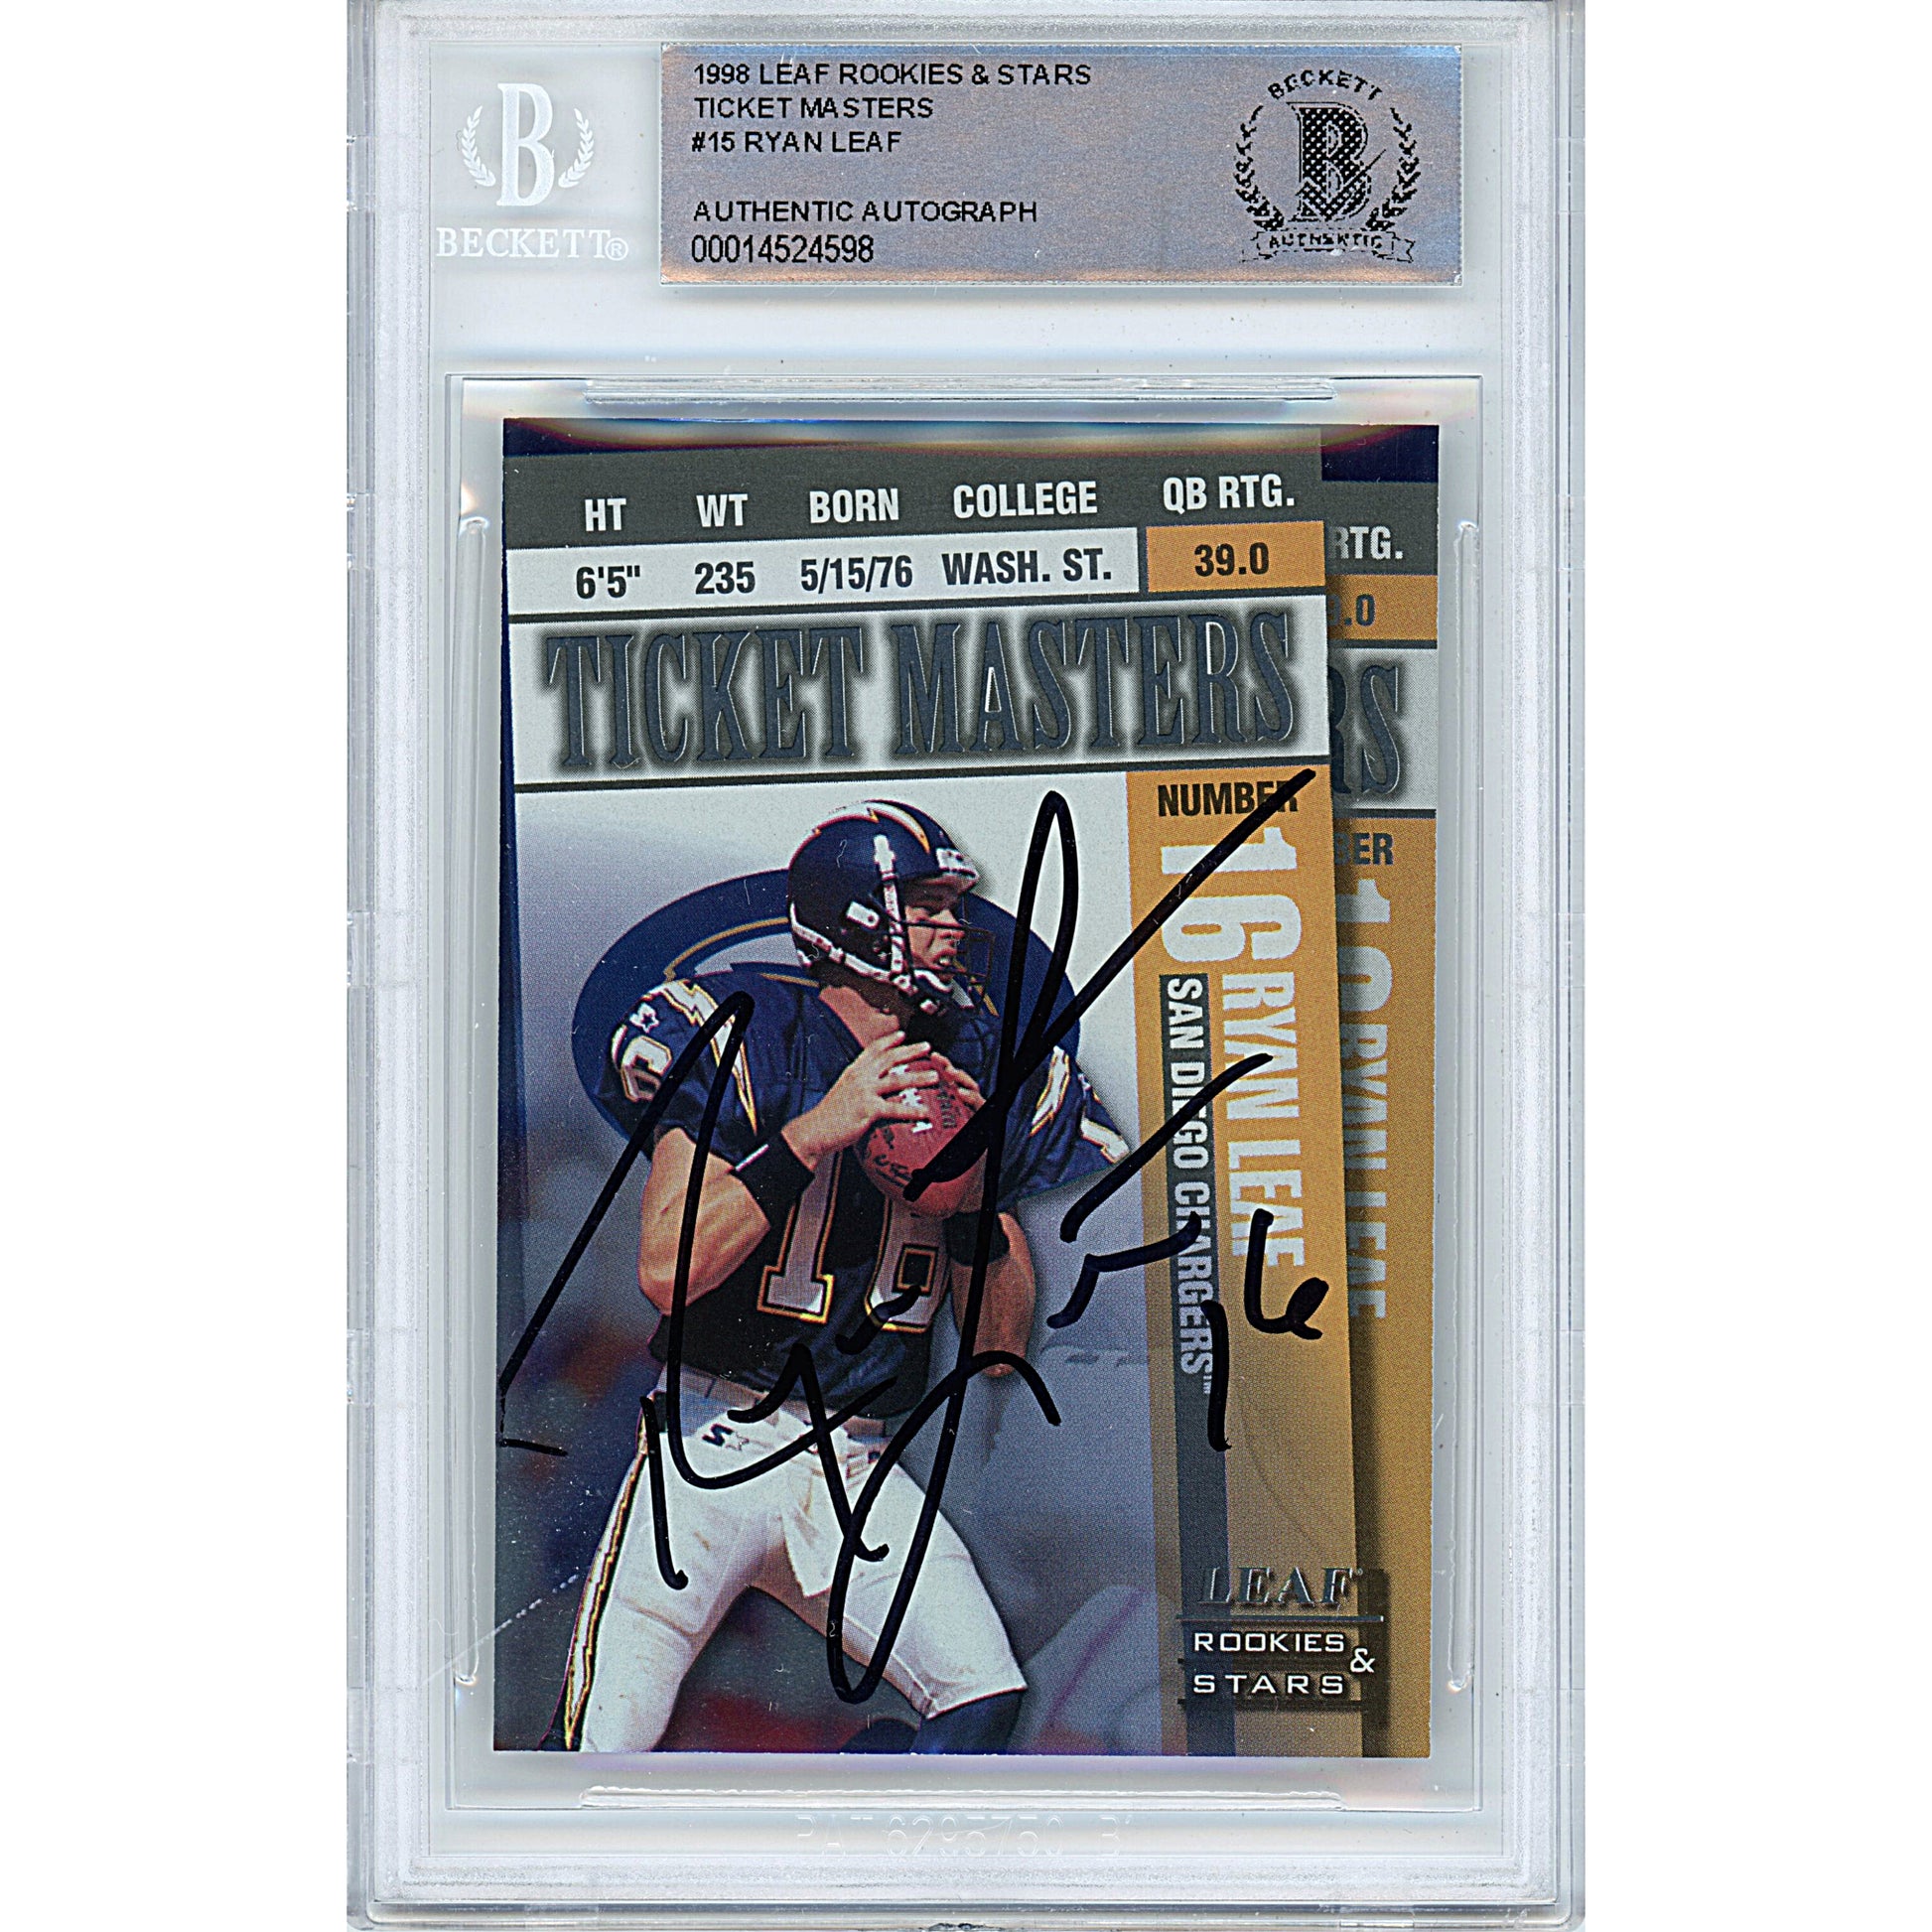 Footballs- Autographed- Ryan Leaf Signed San Diego Chargers 1998 Leaf Rookies and Stars Ticket Masters Football Card Beckett Slabbed 00014524598 - 101